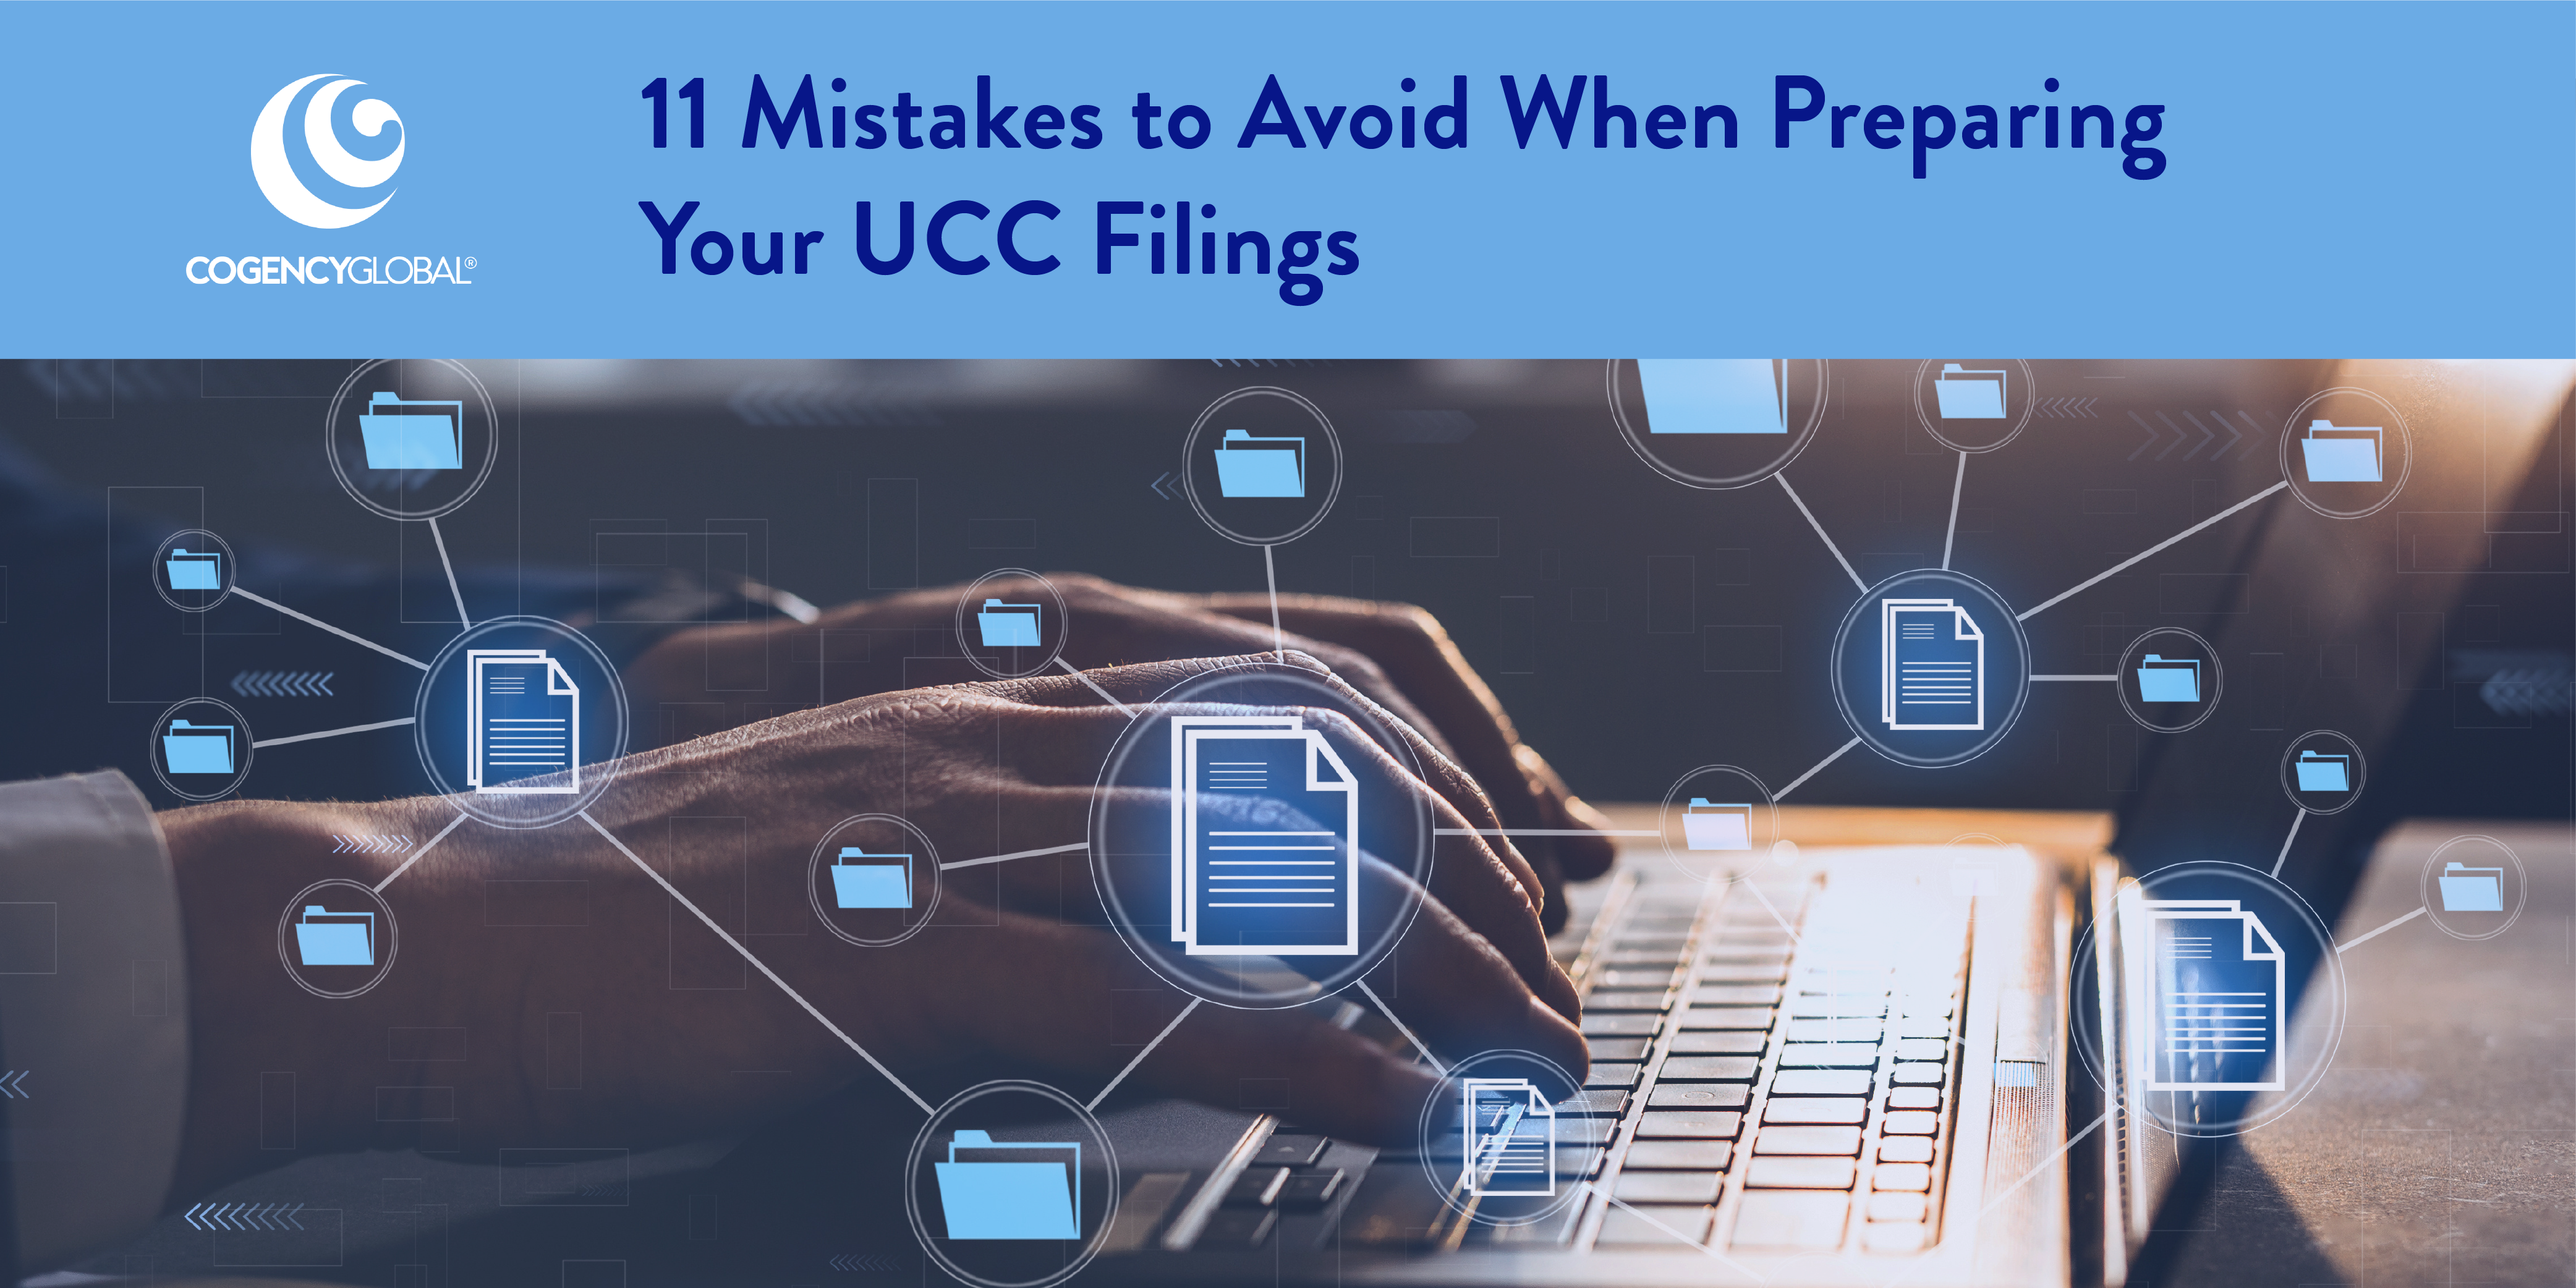 11 Mistakes to Avoid When Preparing Your UCC Filings